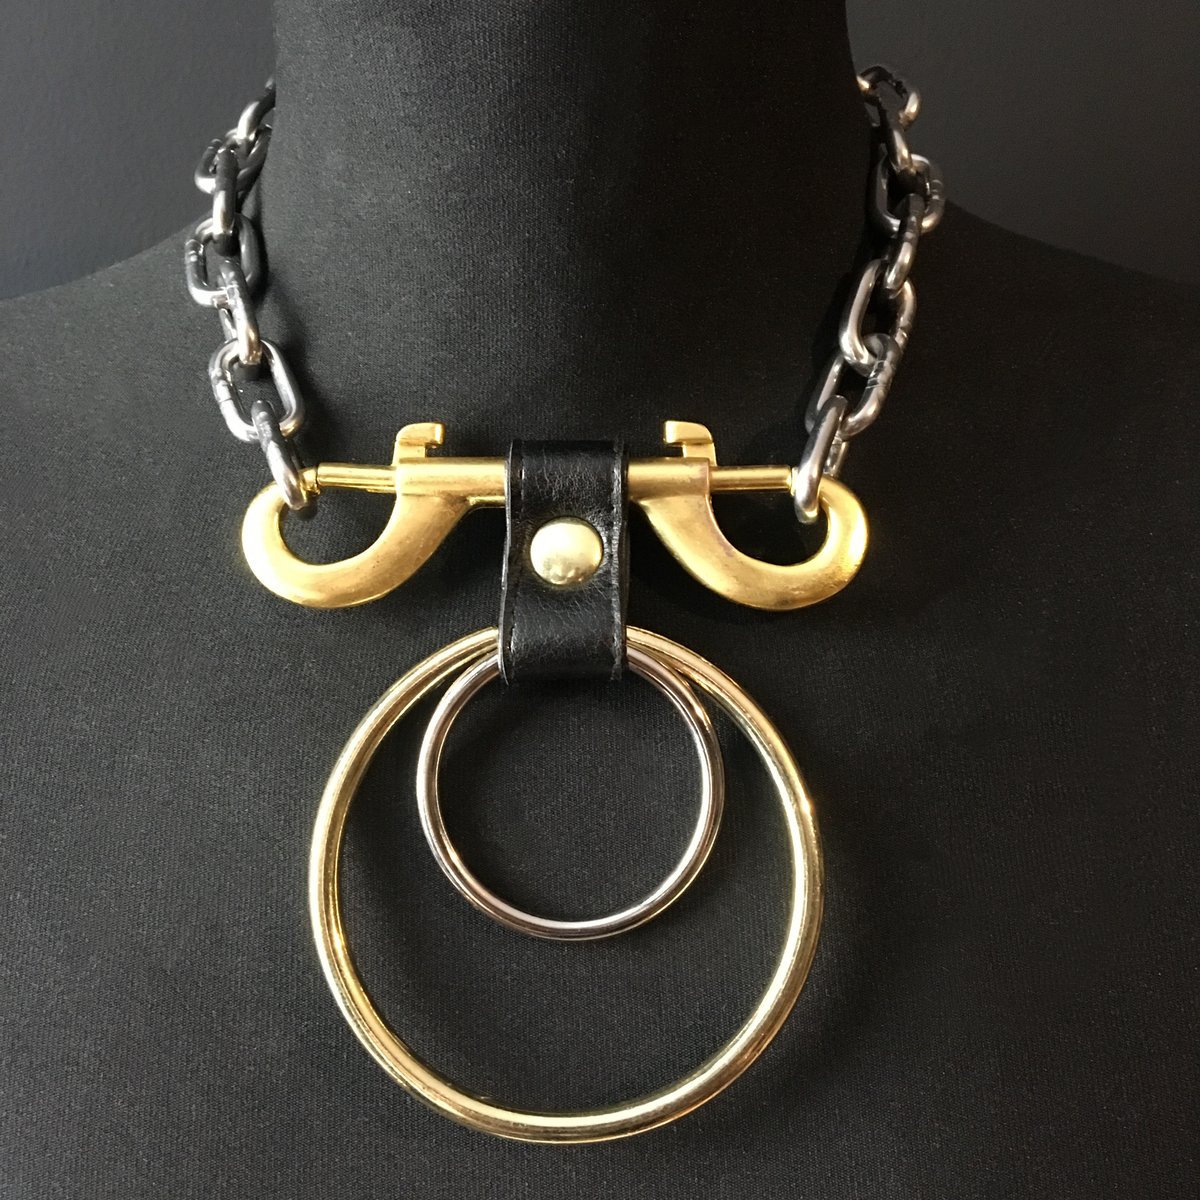 Double ring necklace silver and gold